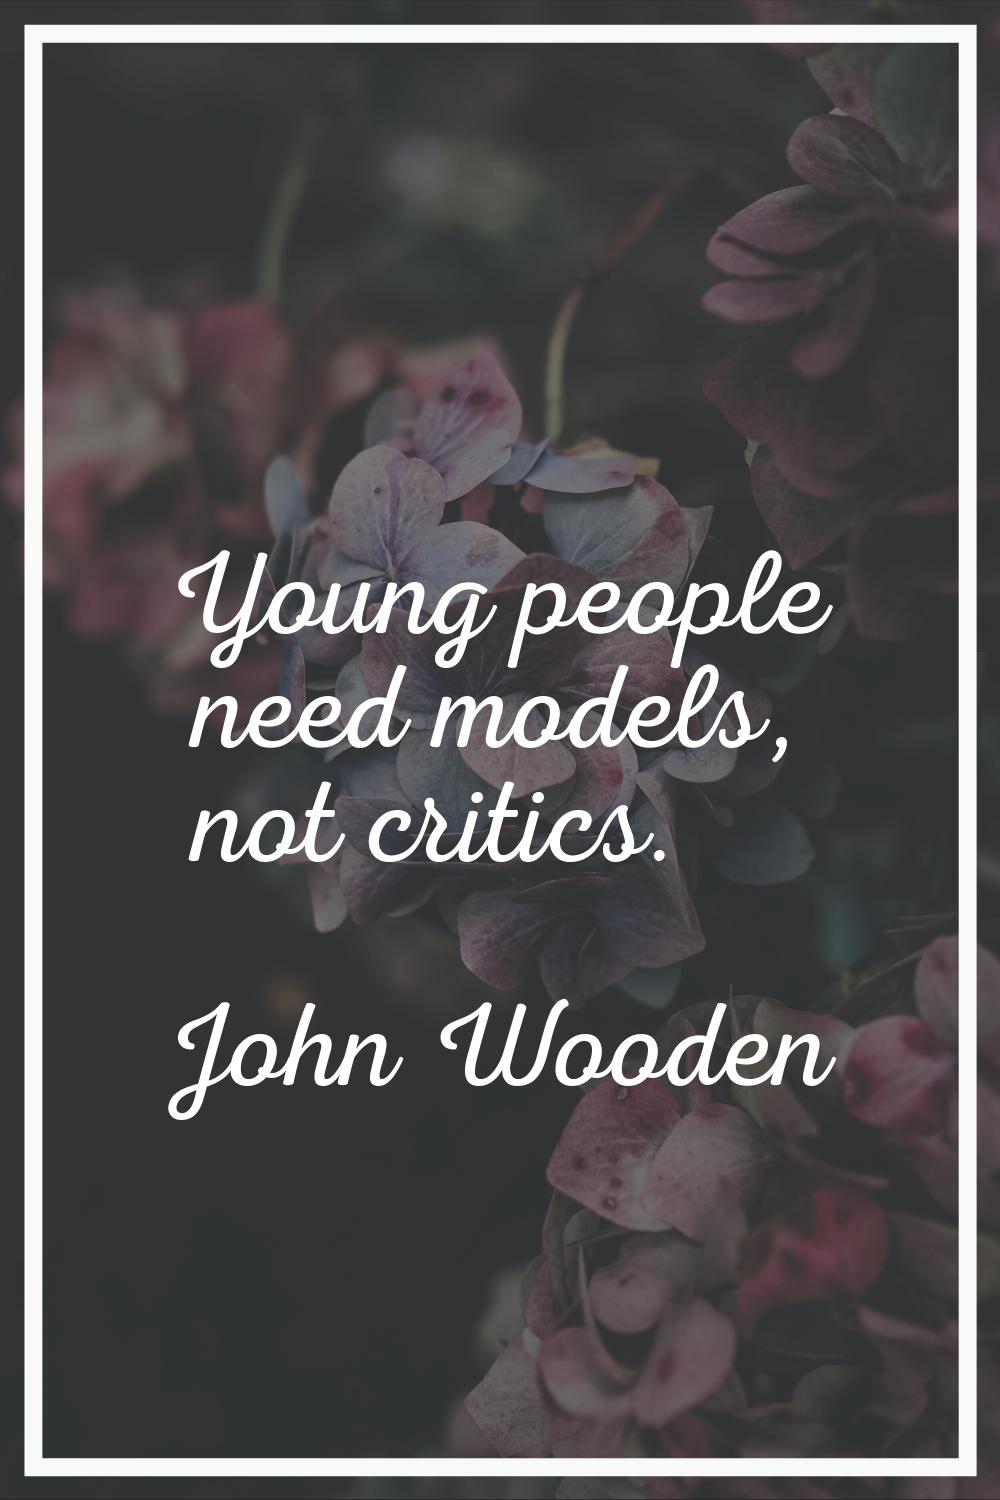 Young people need models, not critics.